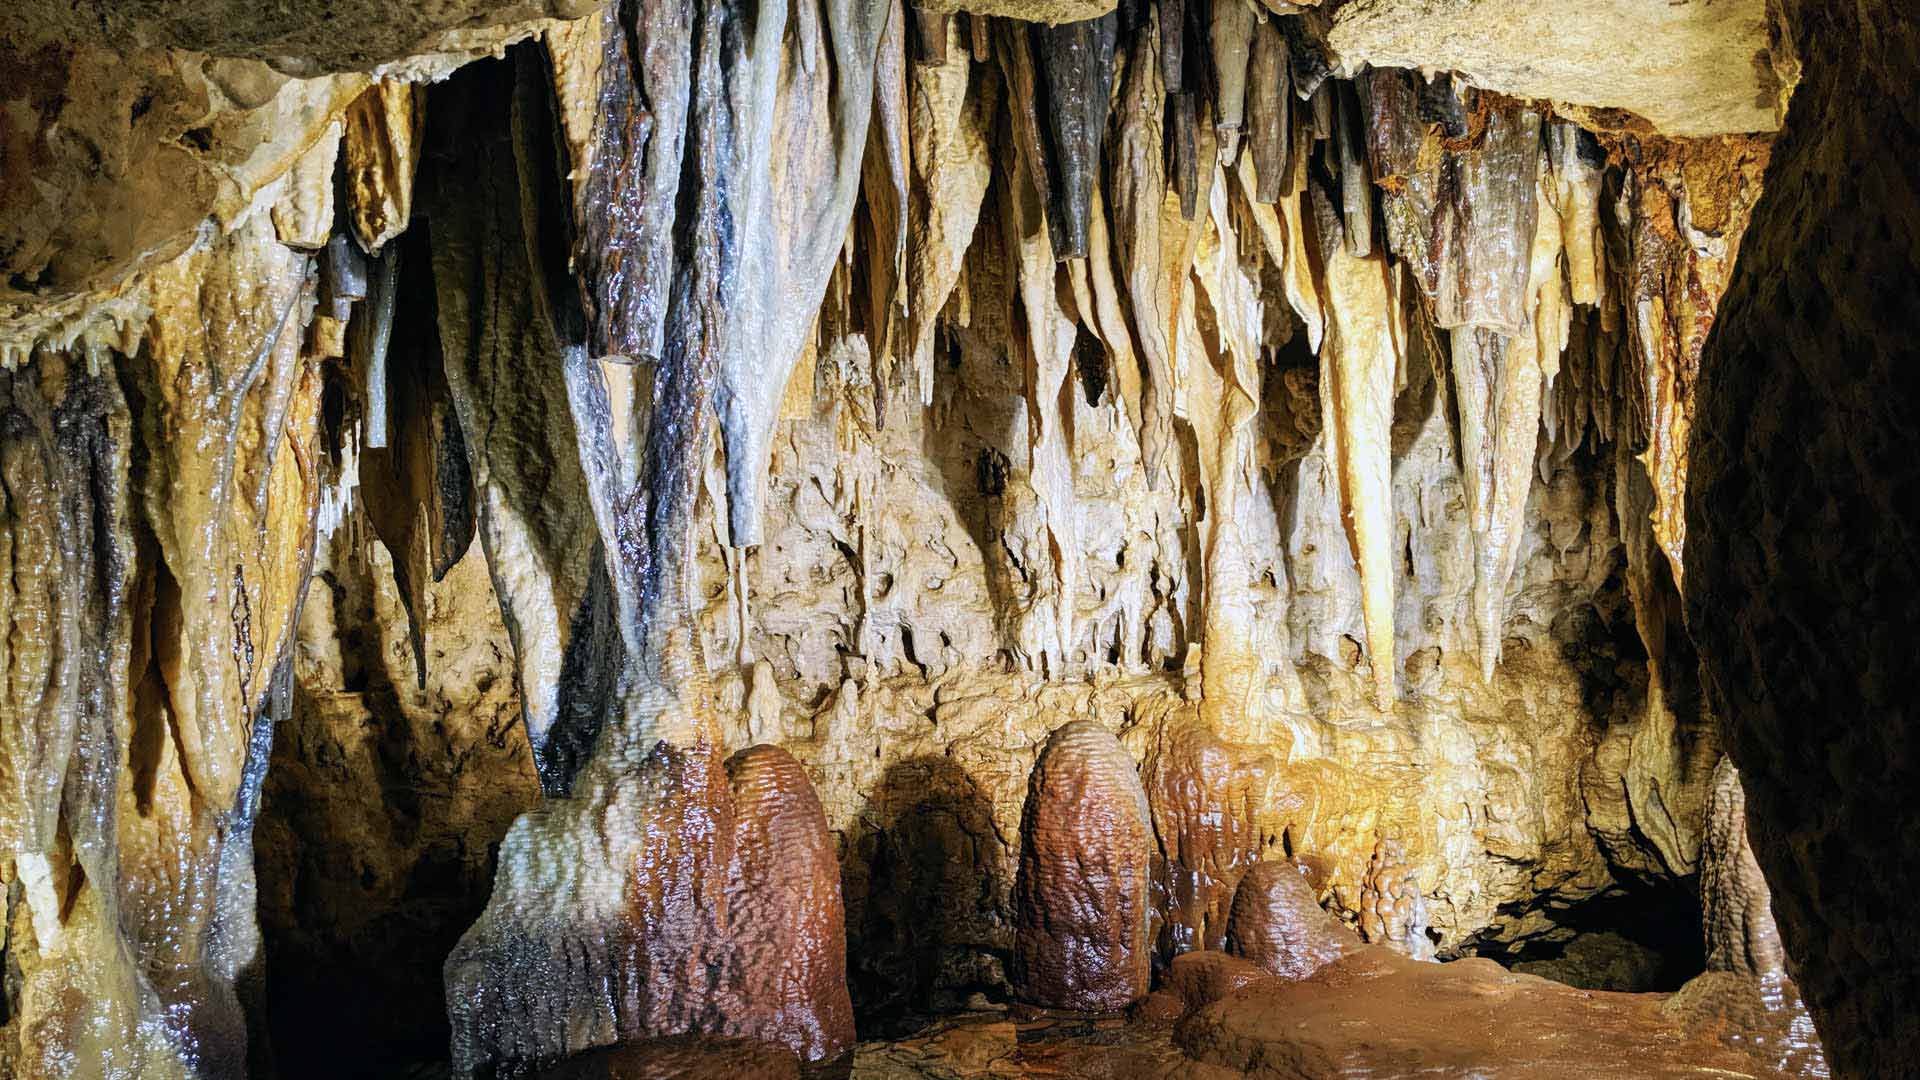 A cave with stalactites and stalagmites formations